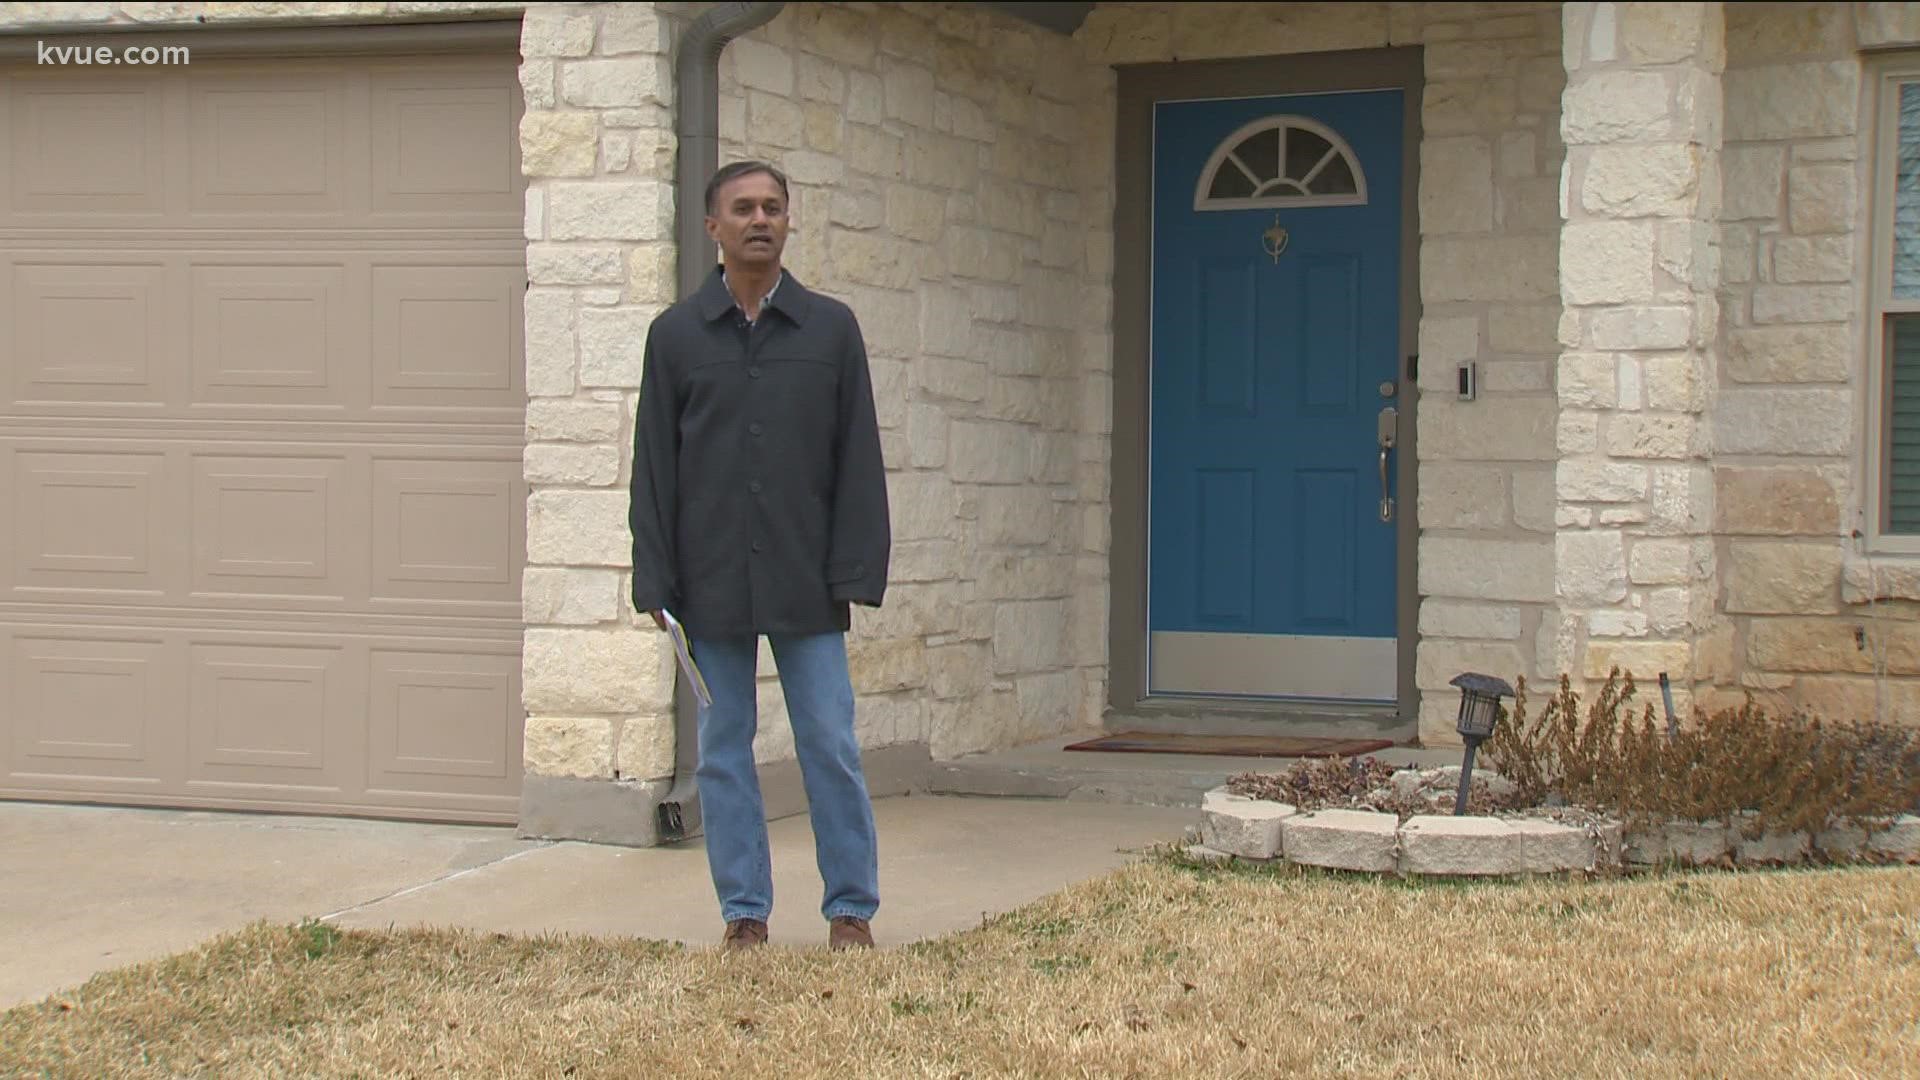 KVUE spoke with a company that aims to help buyers buy homes with cash in Austin. Cash offers can help even the playing field.